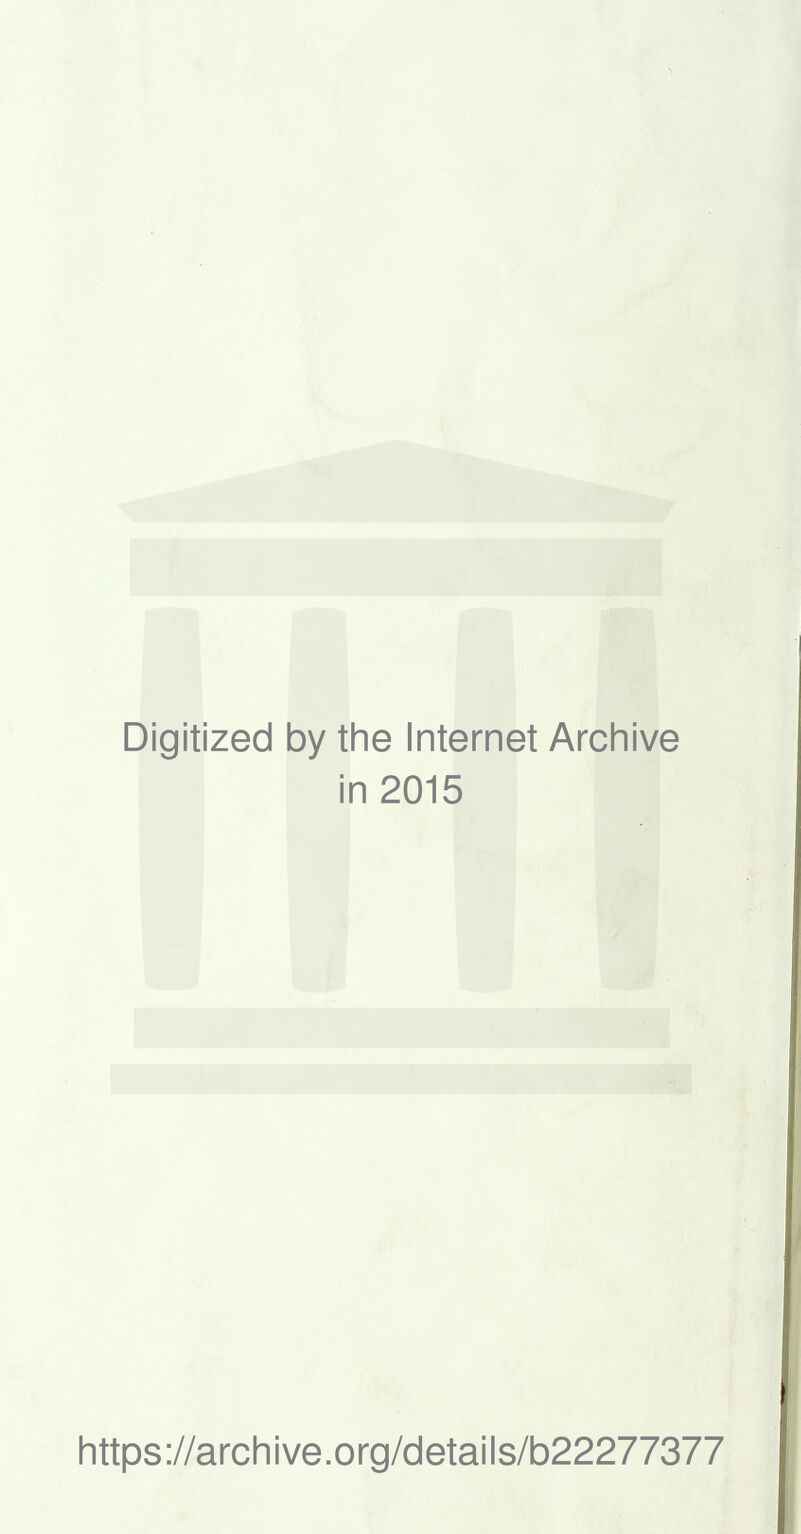 Digitized by the Internet Archive in 2015 https://archive.org/details/b22277377